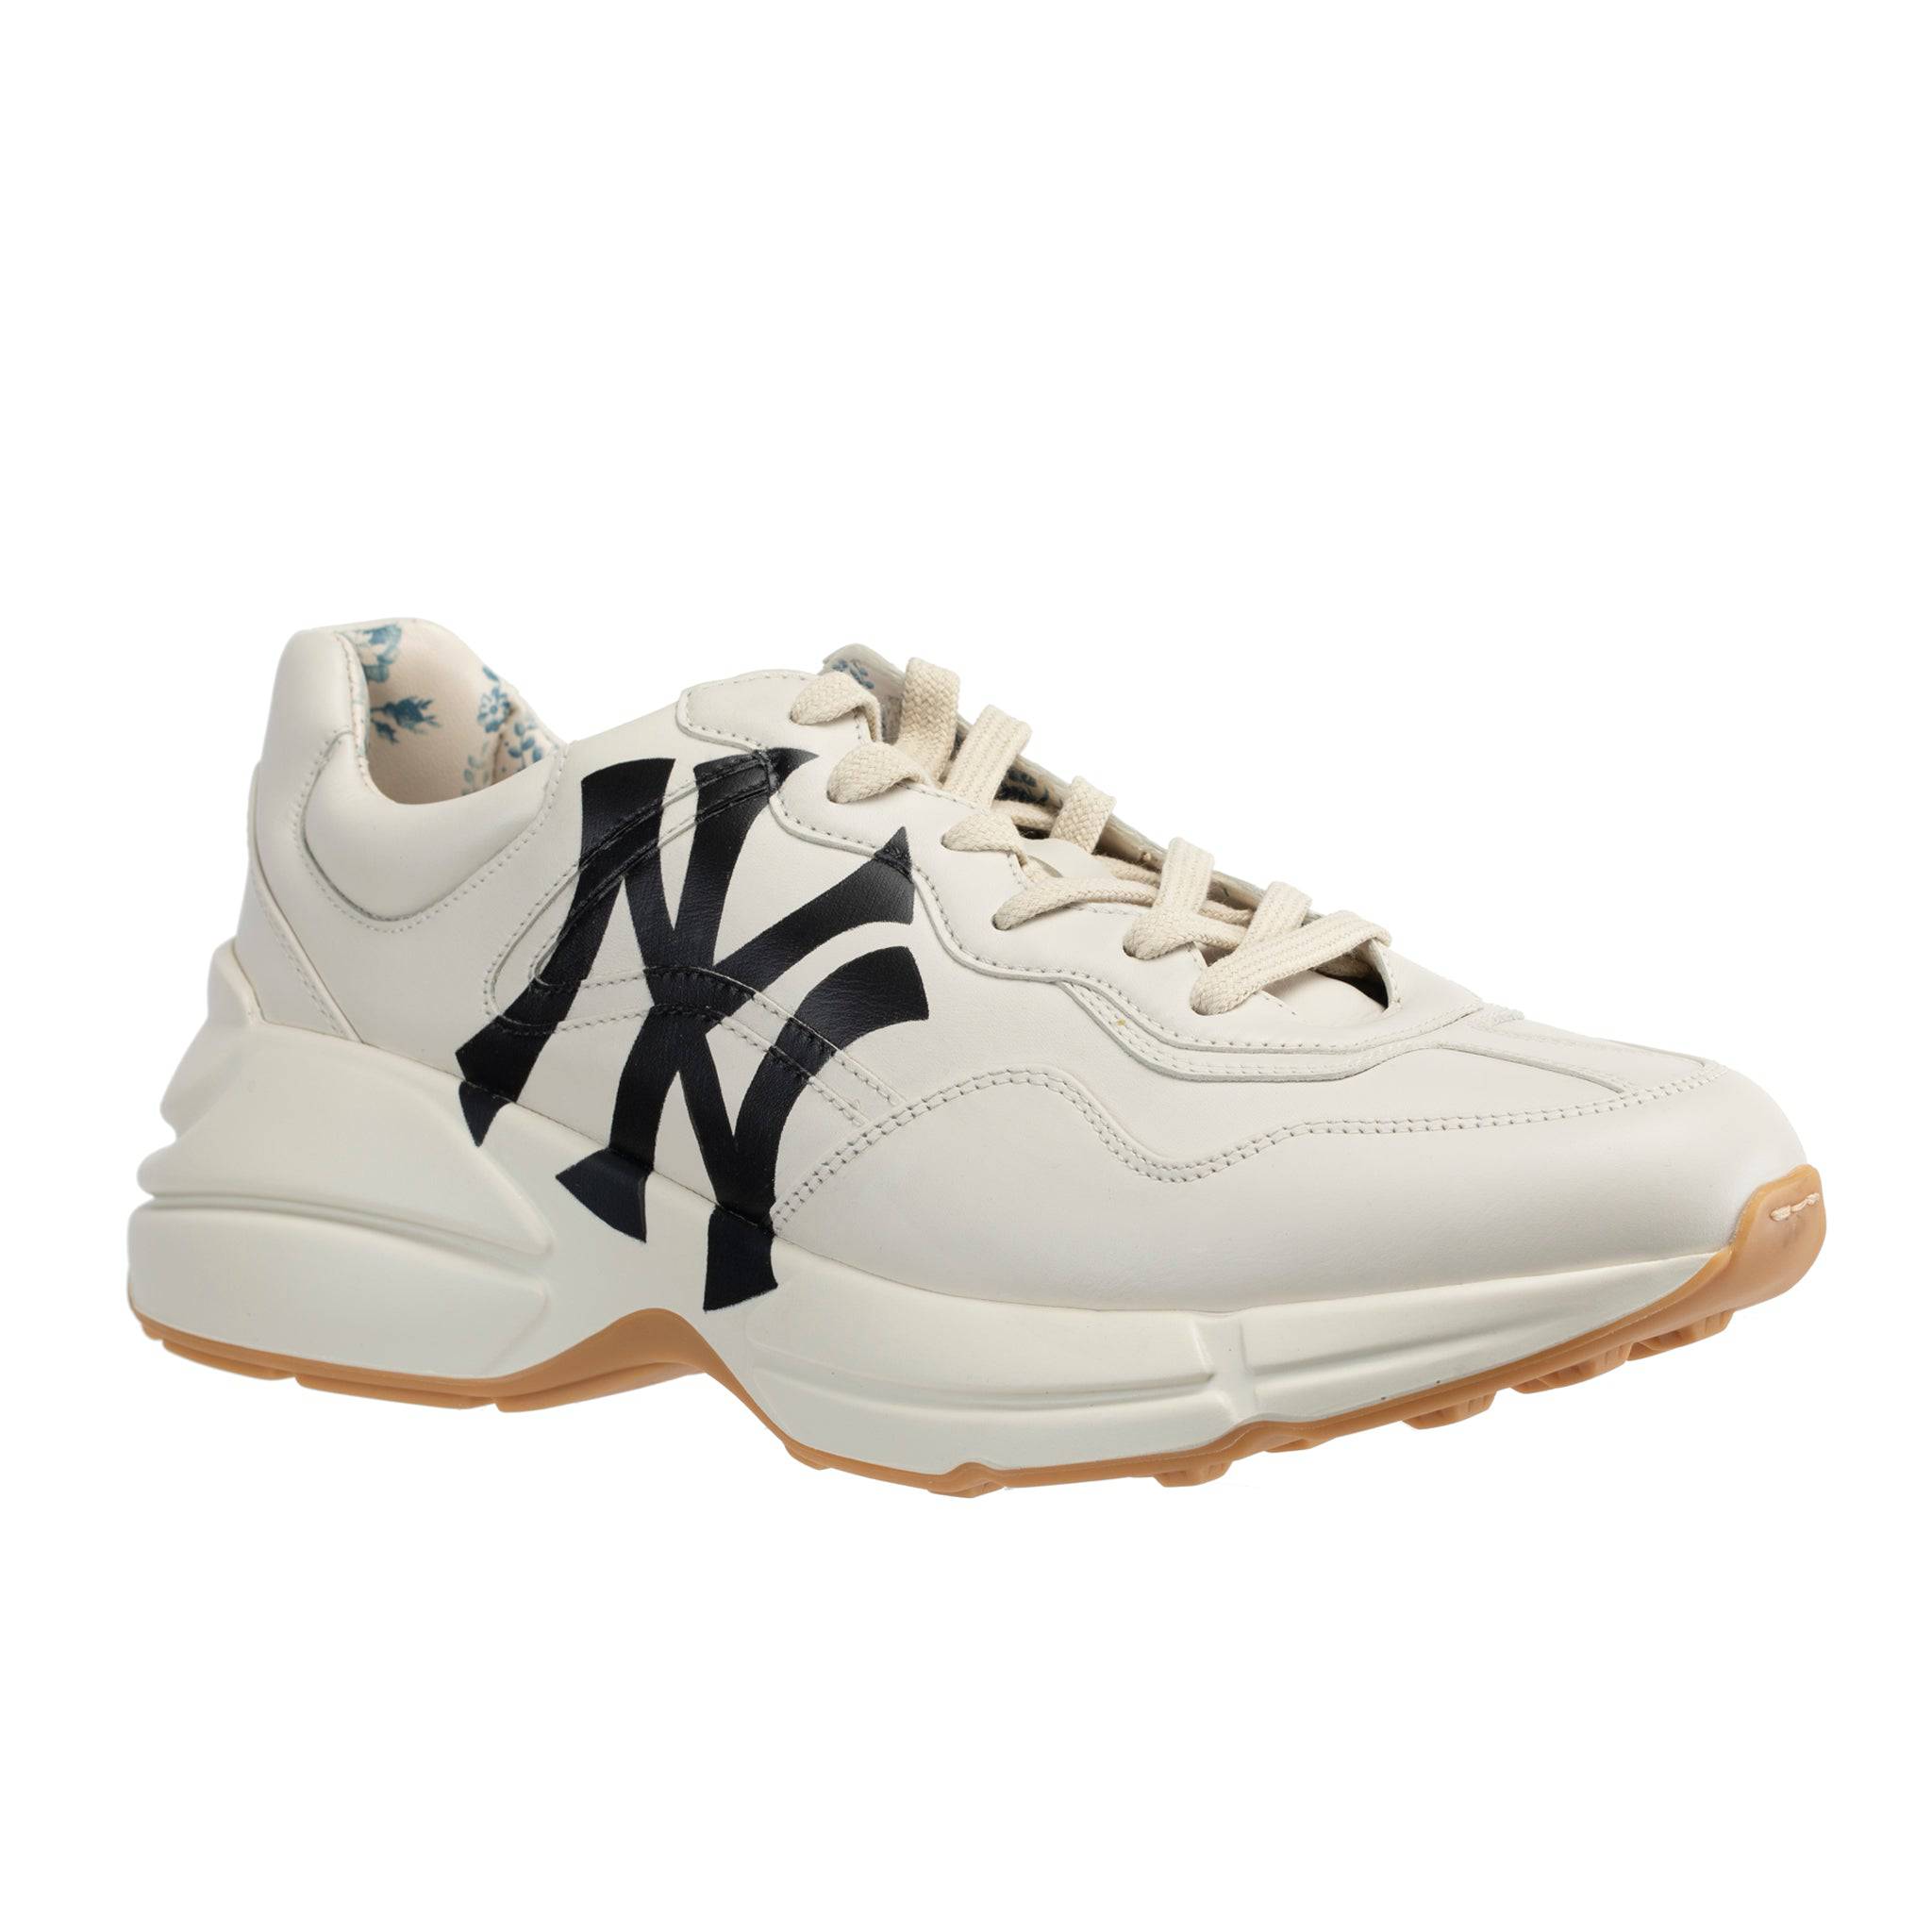 GUCCI RYTHON SNEAKERS OFF-WHITE NY YANKEES LOGO - On Repeat